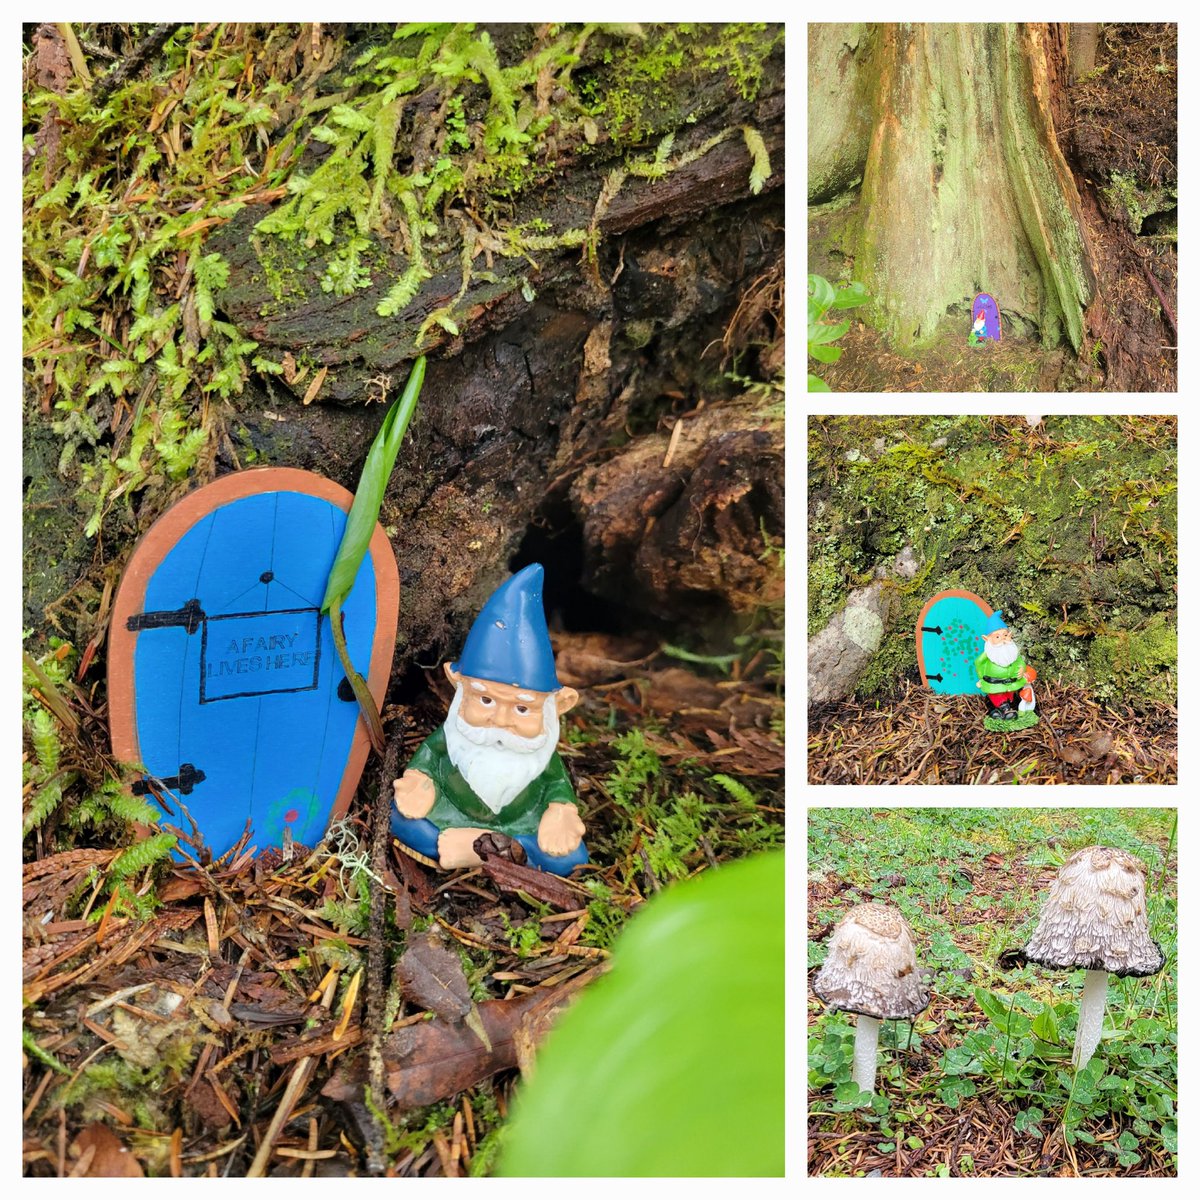 I love our morning hikes. We meet the coolest characters 🧙‍♂️